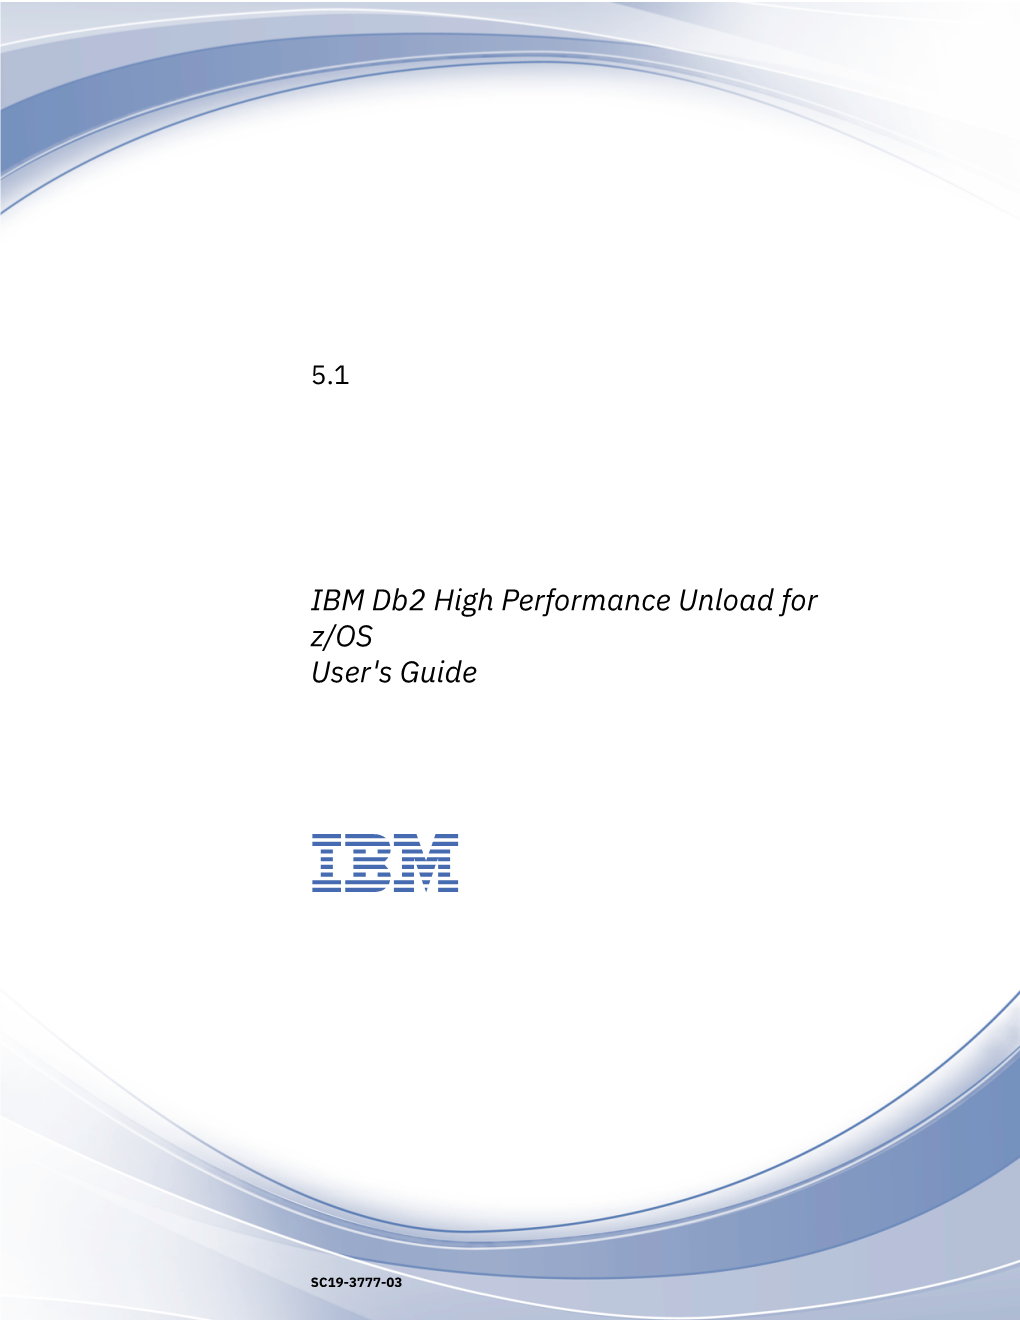 IBM Db2 High Performance Unload for Z/OS User's Guide